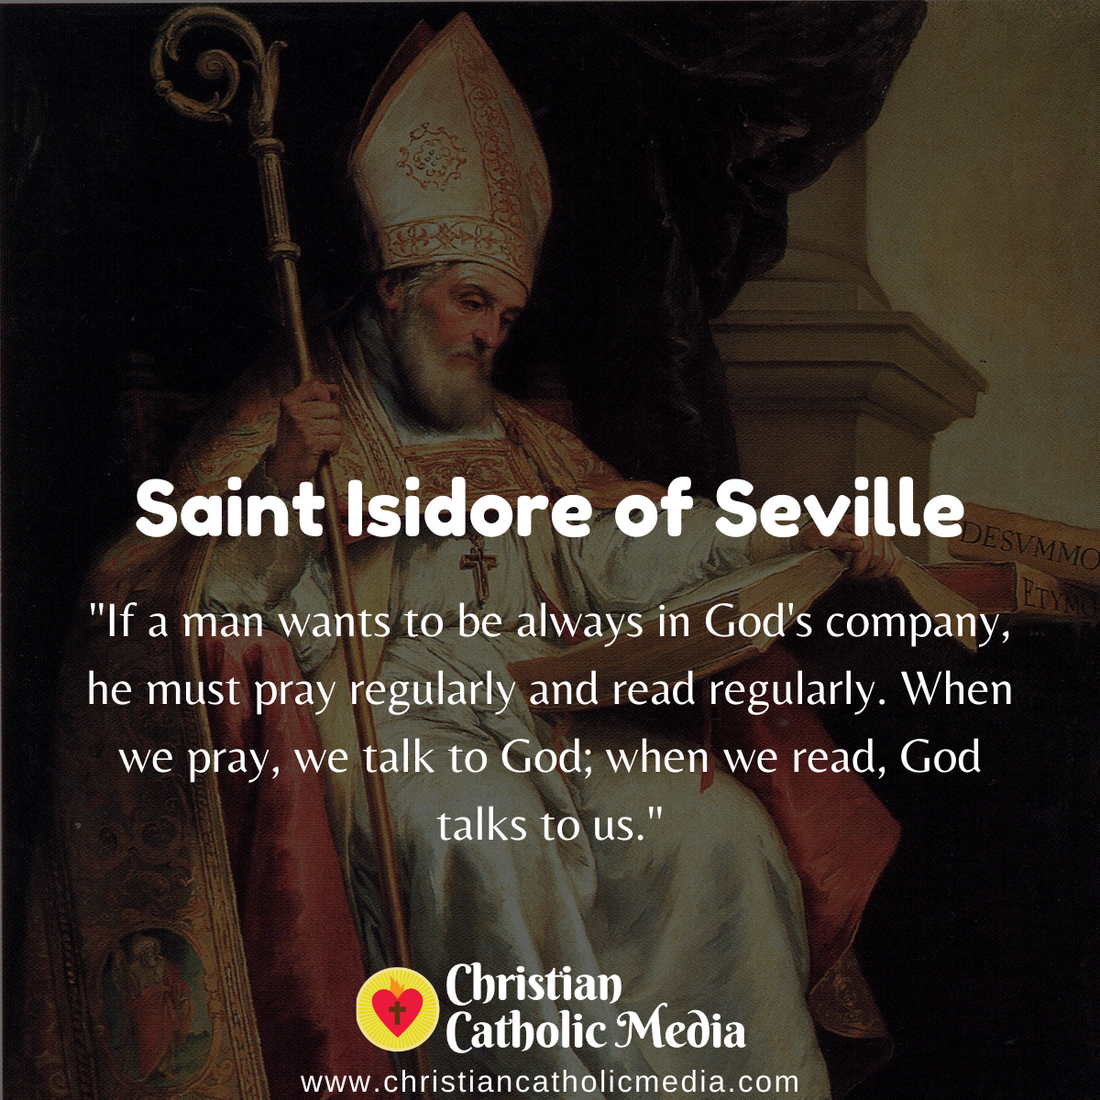 St. Isidore of Seville - Monday April 4, 2022